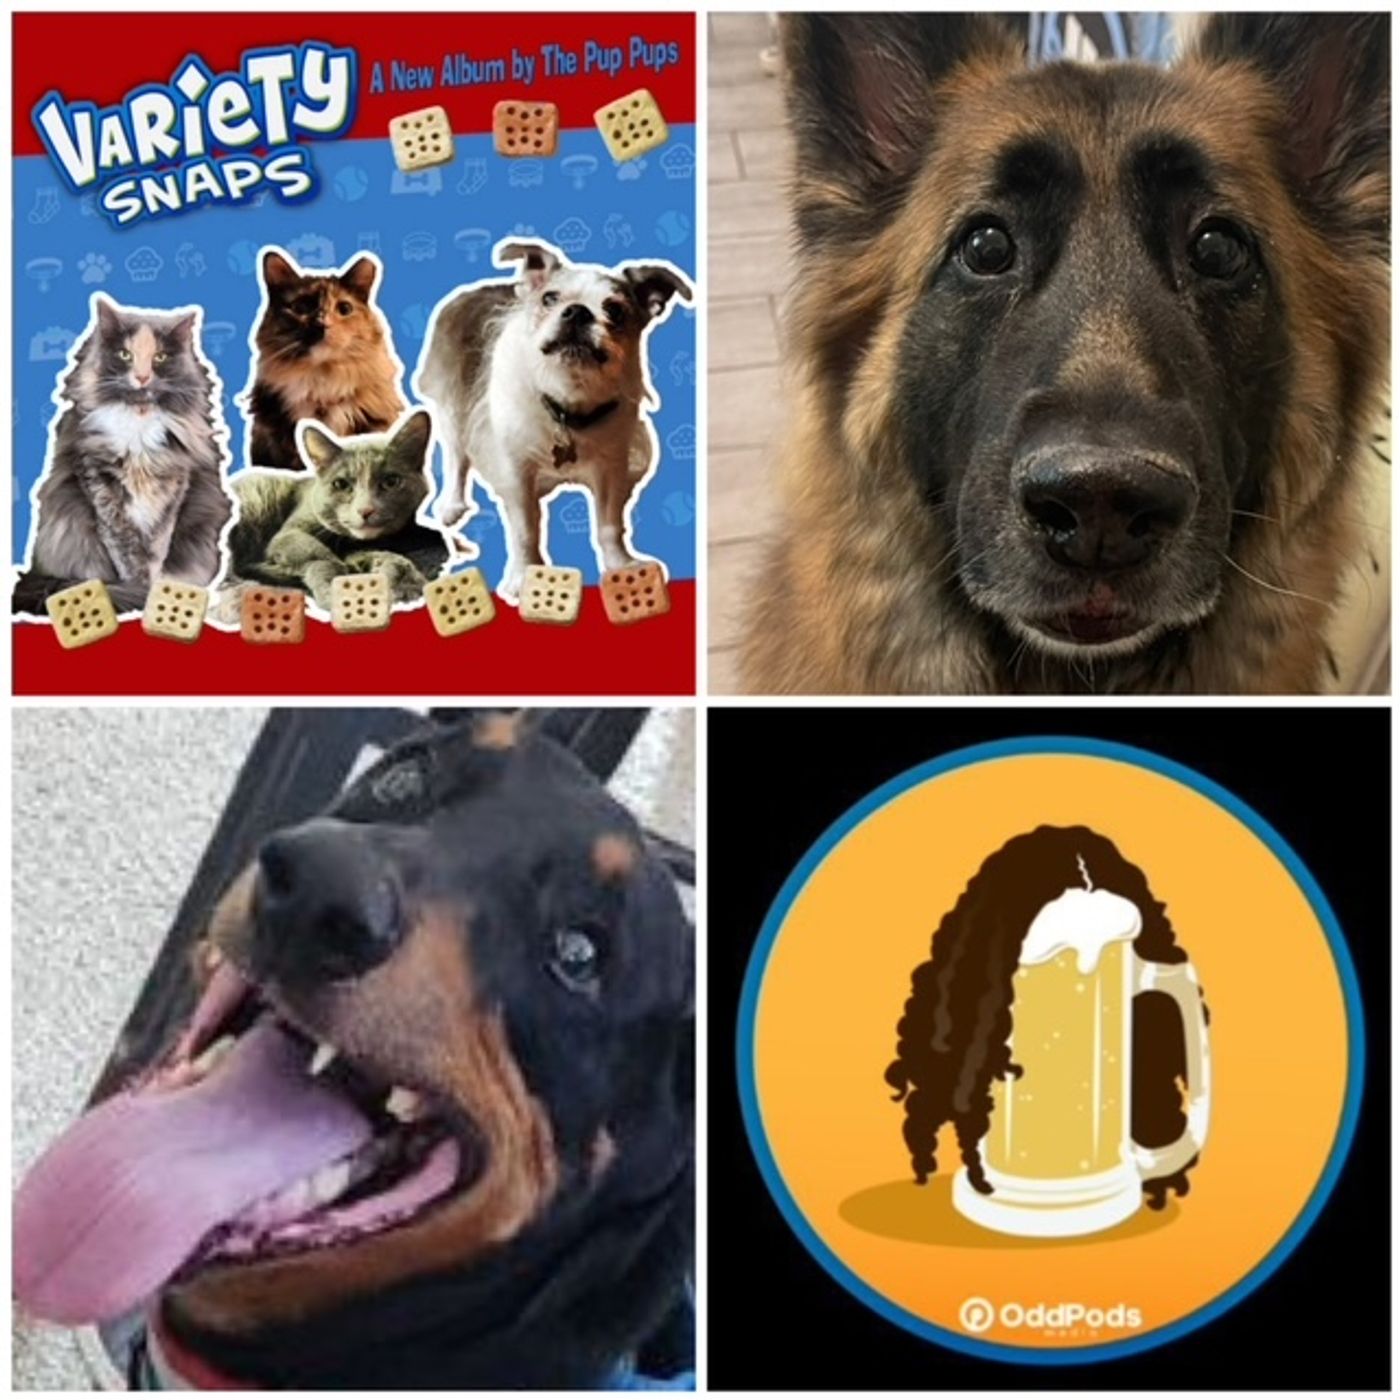 Bonus Episode: Variety Snaps by the Pup Pups